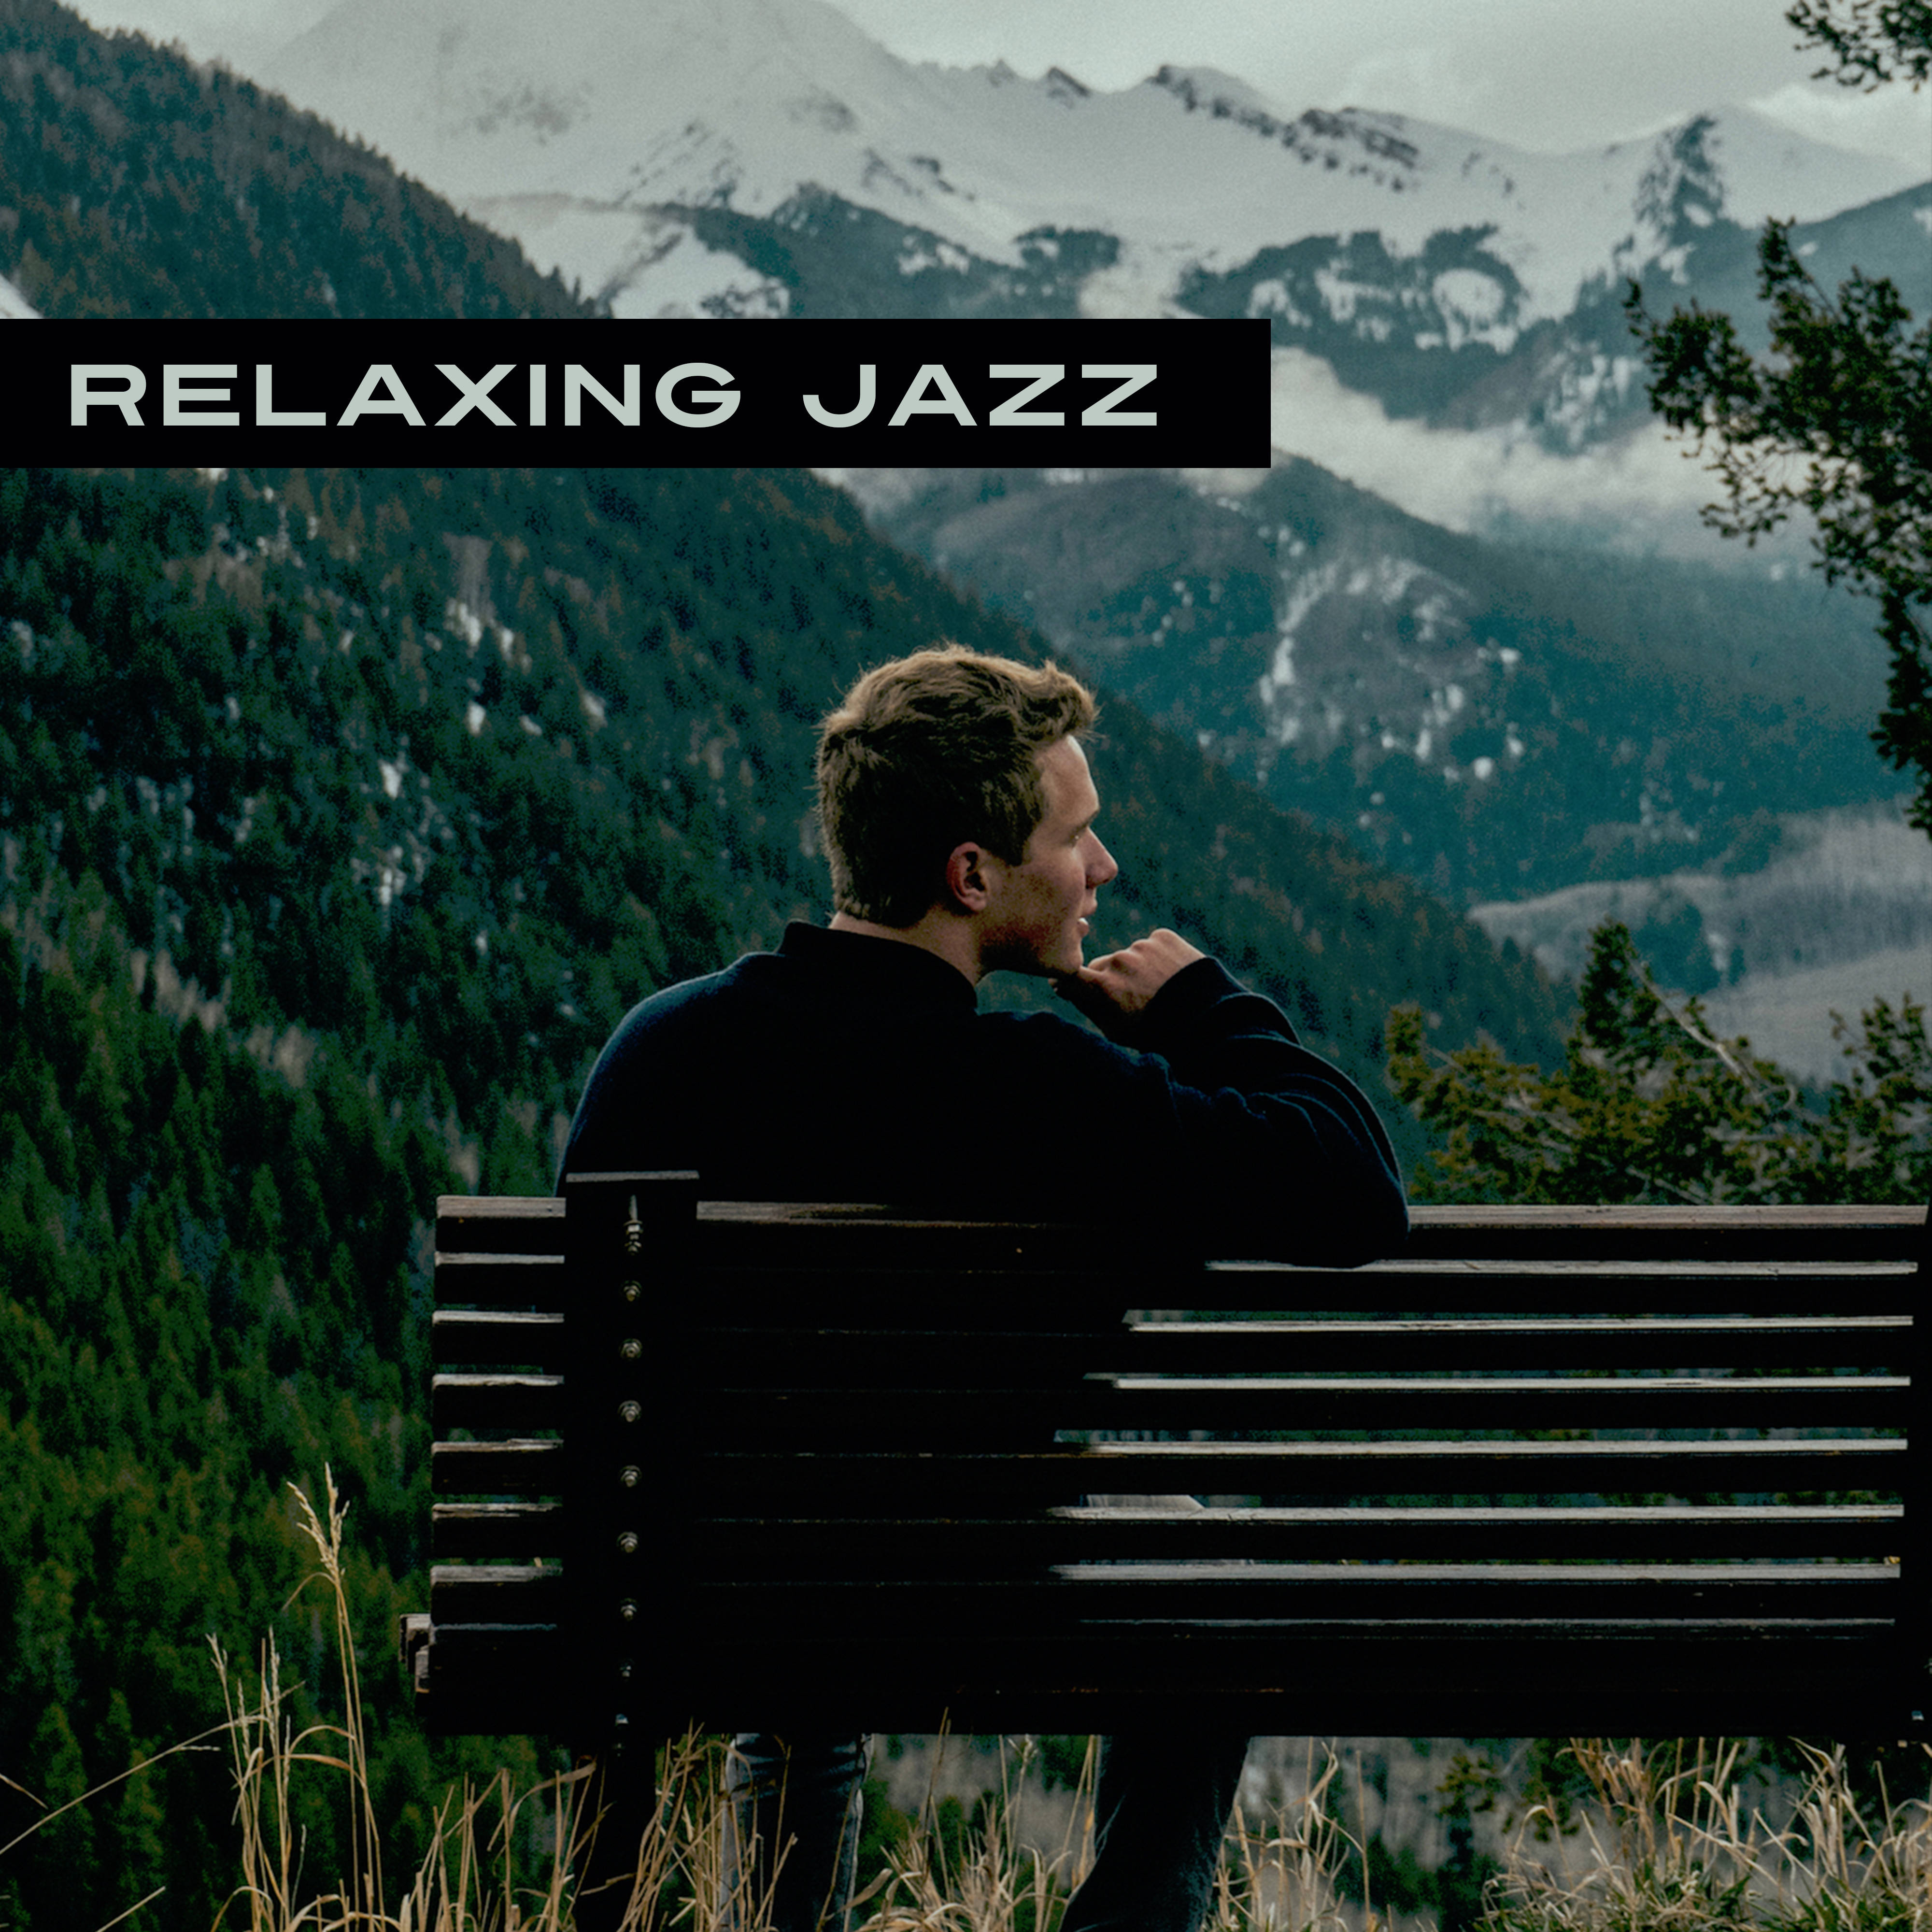 Relaxing Jazz – Calming Instruments for Healing, Rest, Pure Relaxation, Chilled Jazz, Soothing Guitar, Genle Piano, Relaxed Mind, Night Music